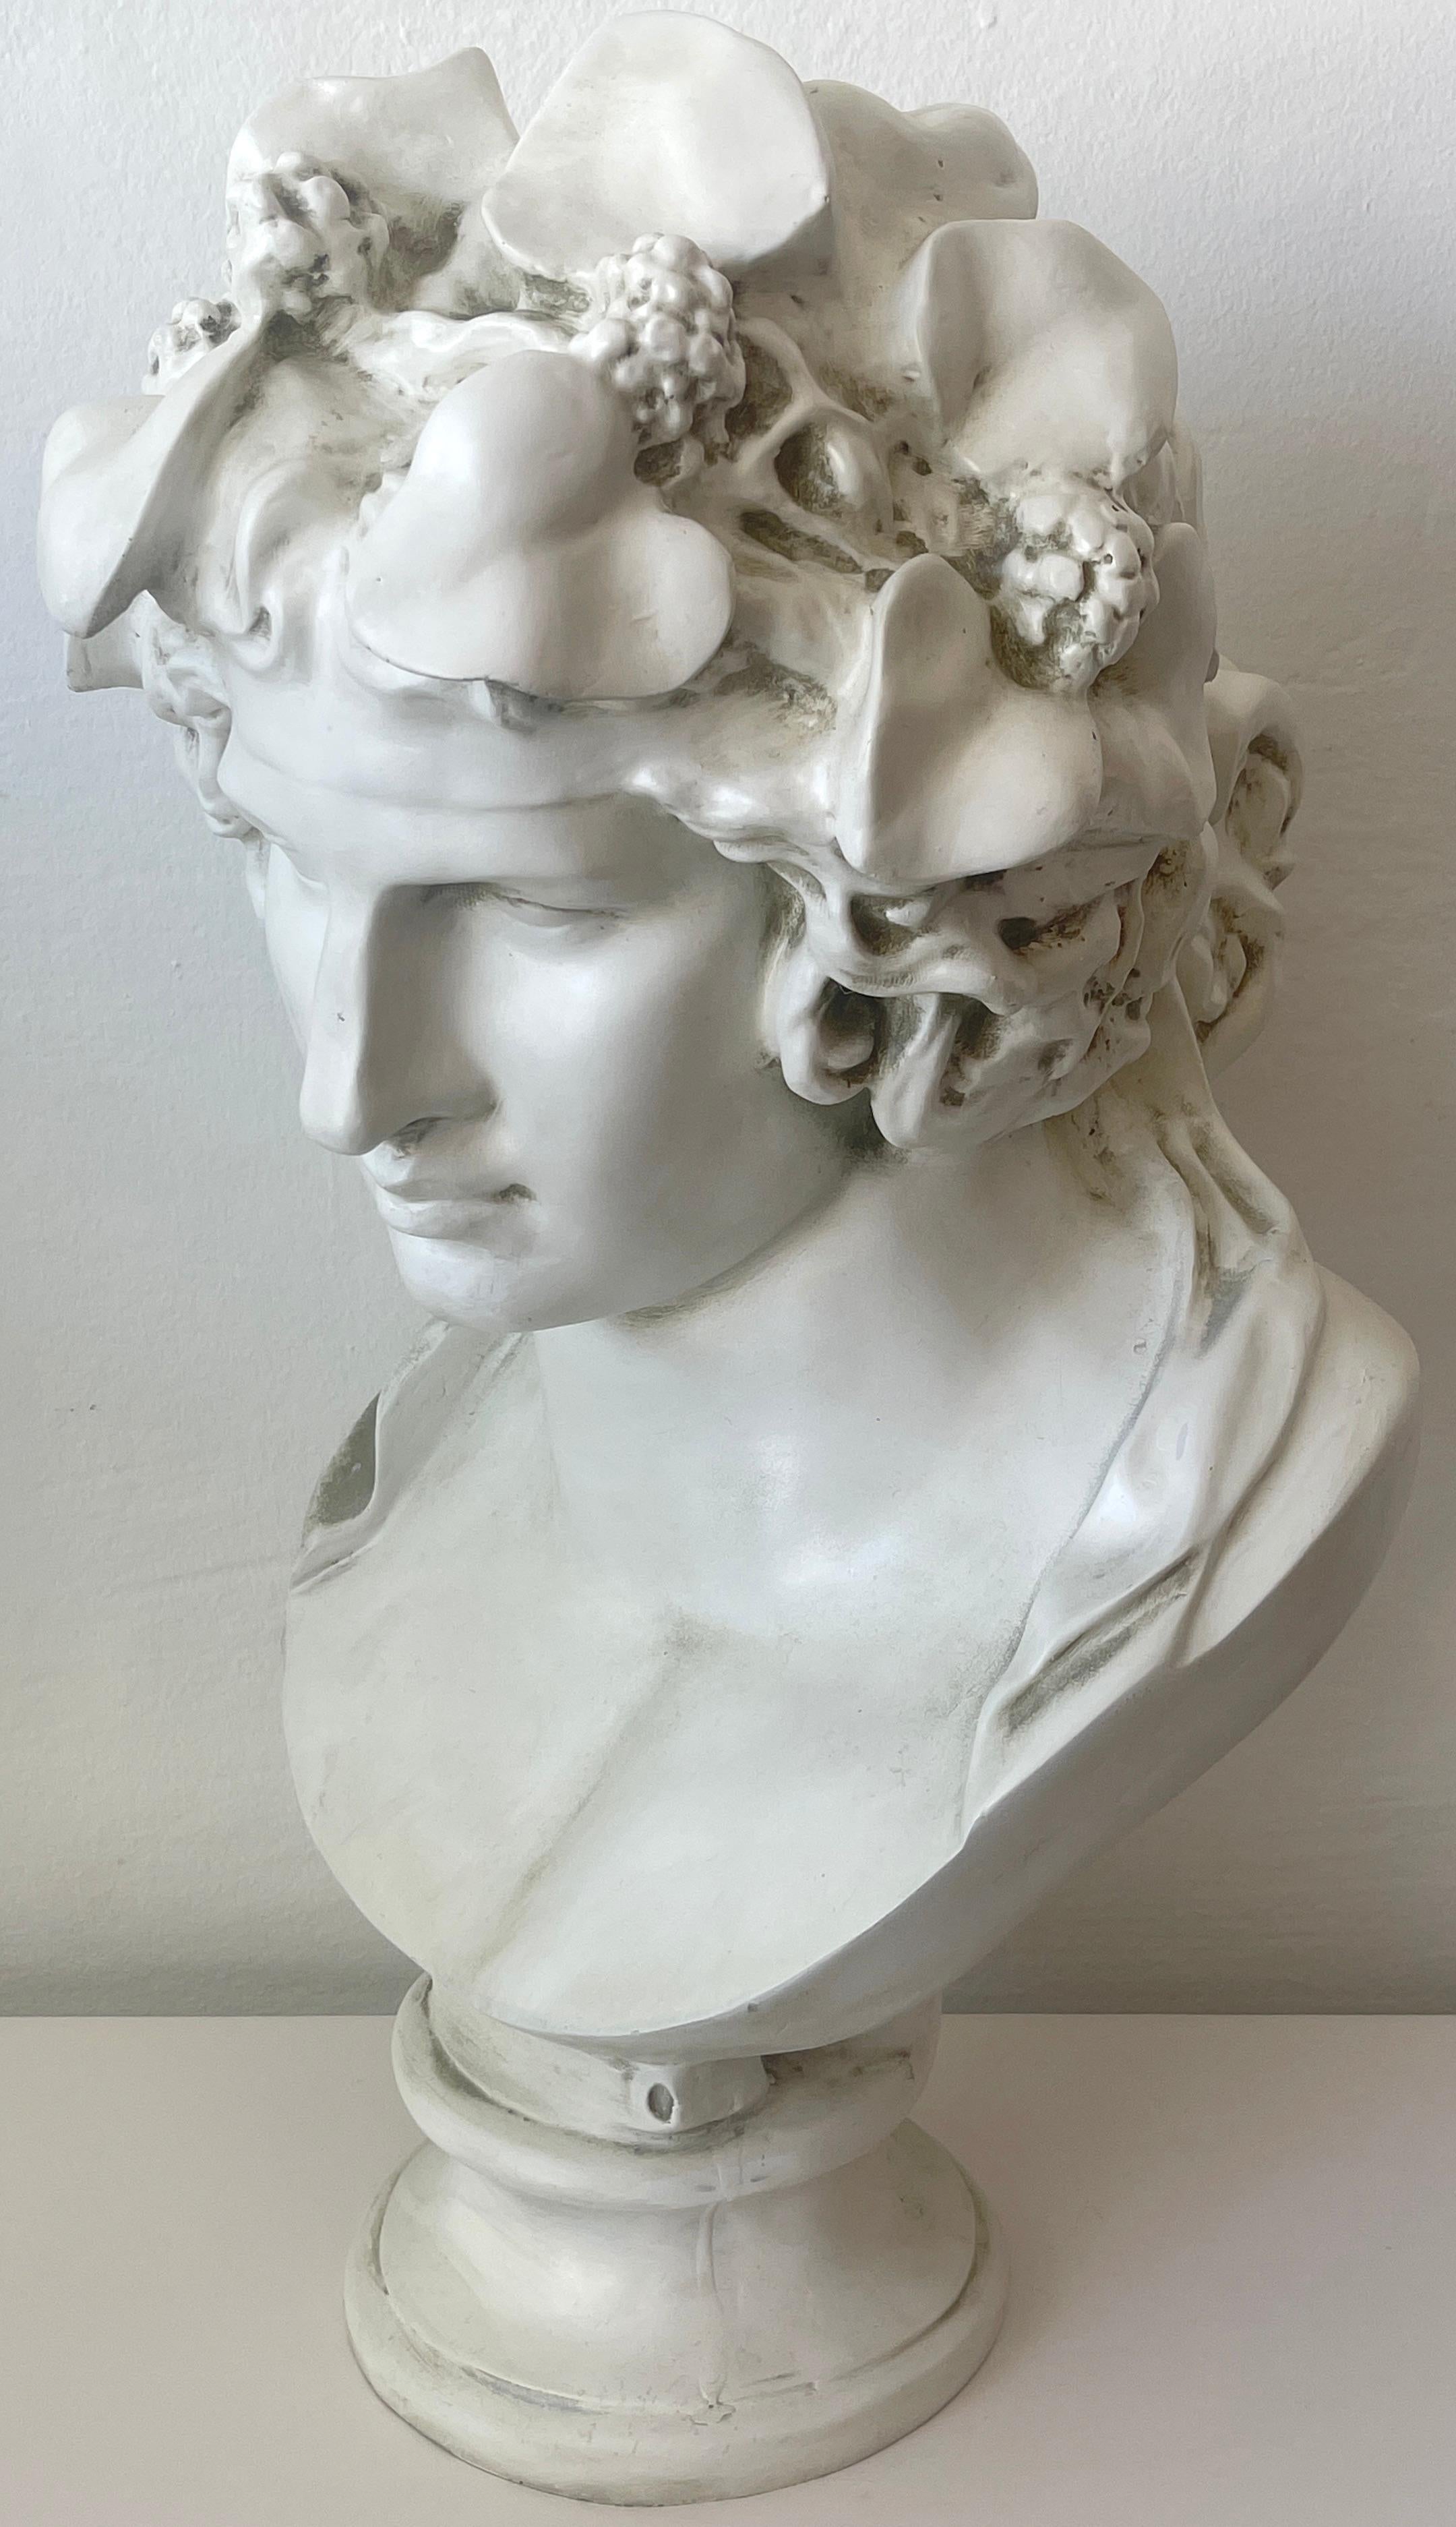 Vintage Lacquered Bust of Antinous as Dionysus, Realistically modeled, of good size and scale, slightly weathered patina. Can be used indoors or outdoors. 
The bust stands 28-inches high x 14-inches wide x 14-inches deep, on a 8-inch diameter base.